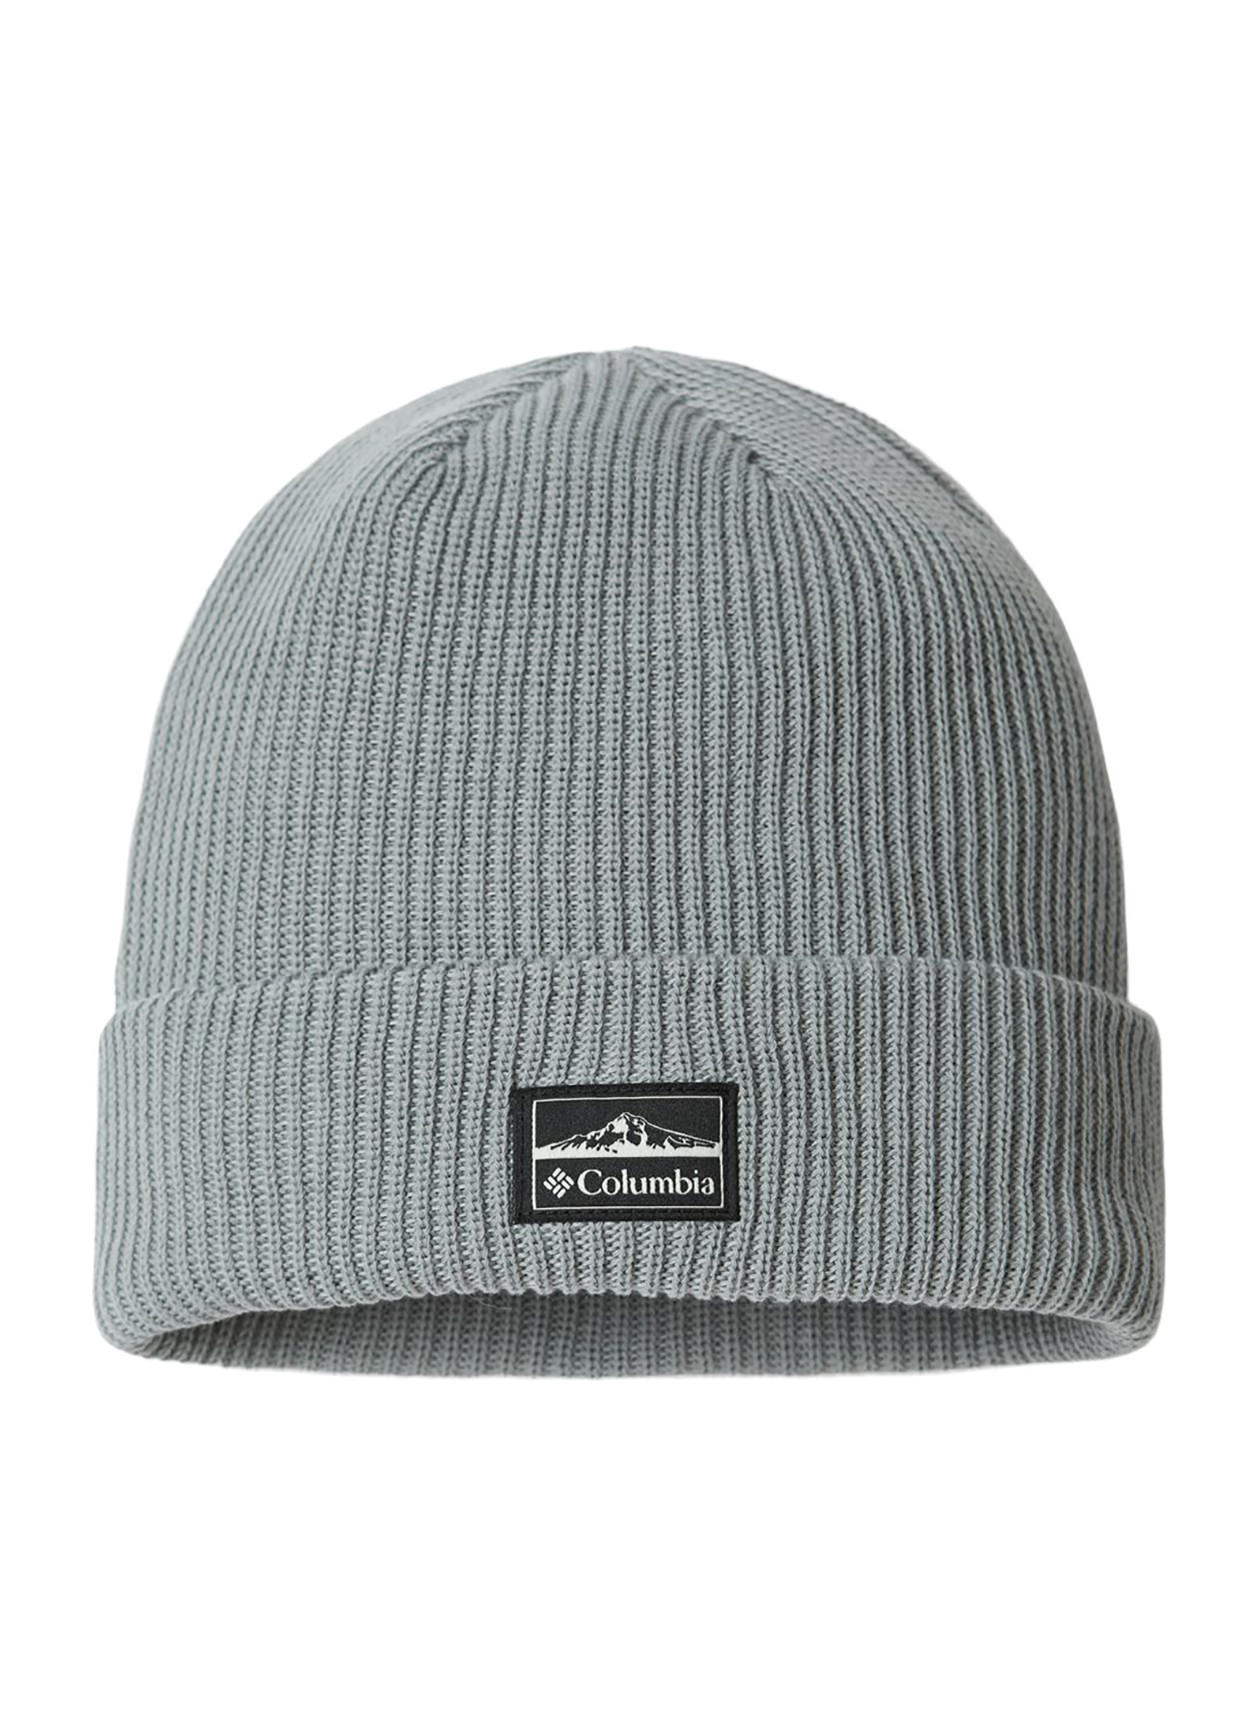 Lost Beanie Lager Grey City Columbia II